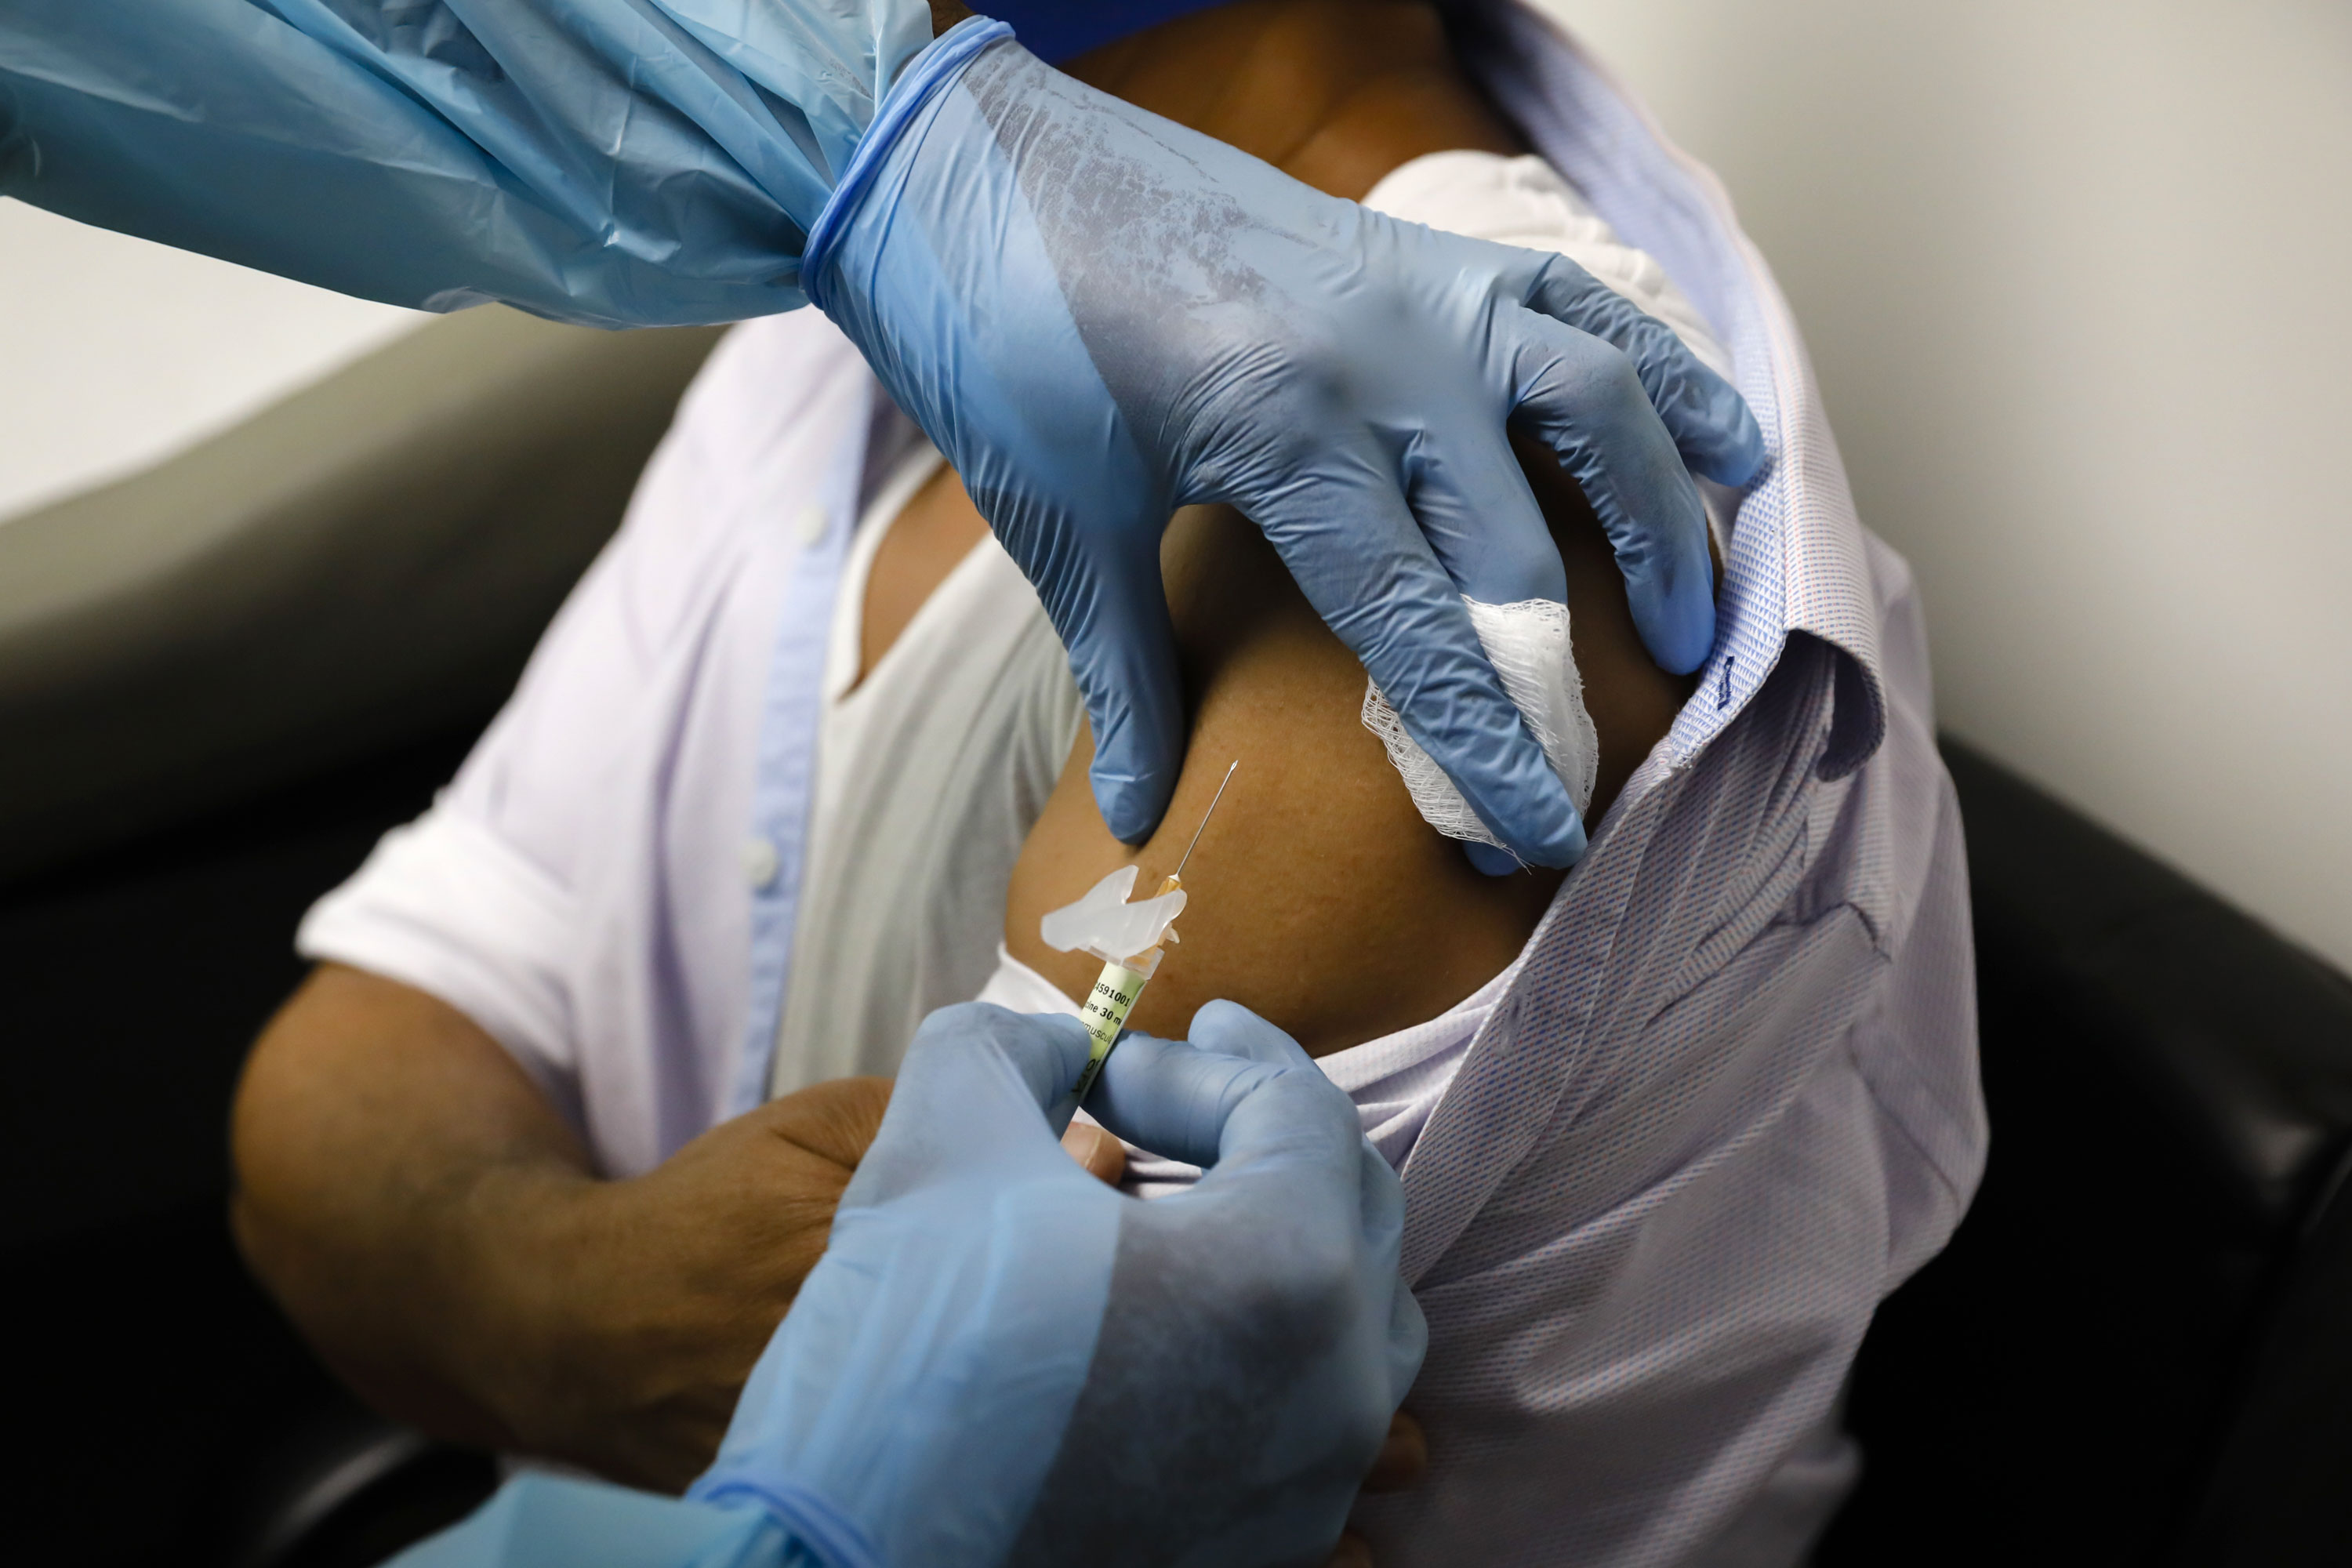 A health worker injects a person during Pfizer clinical trials for a Covid-19 vaccine in Hollywood, Florida, on September 9.